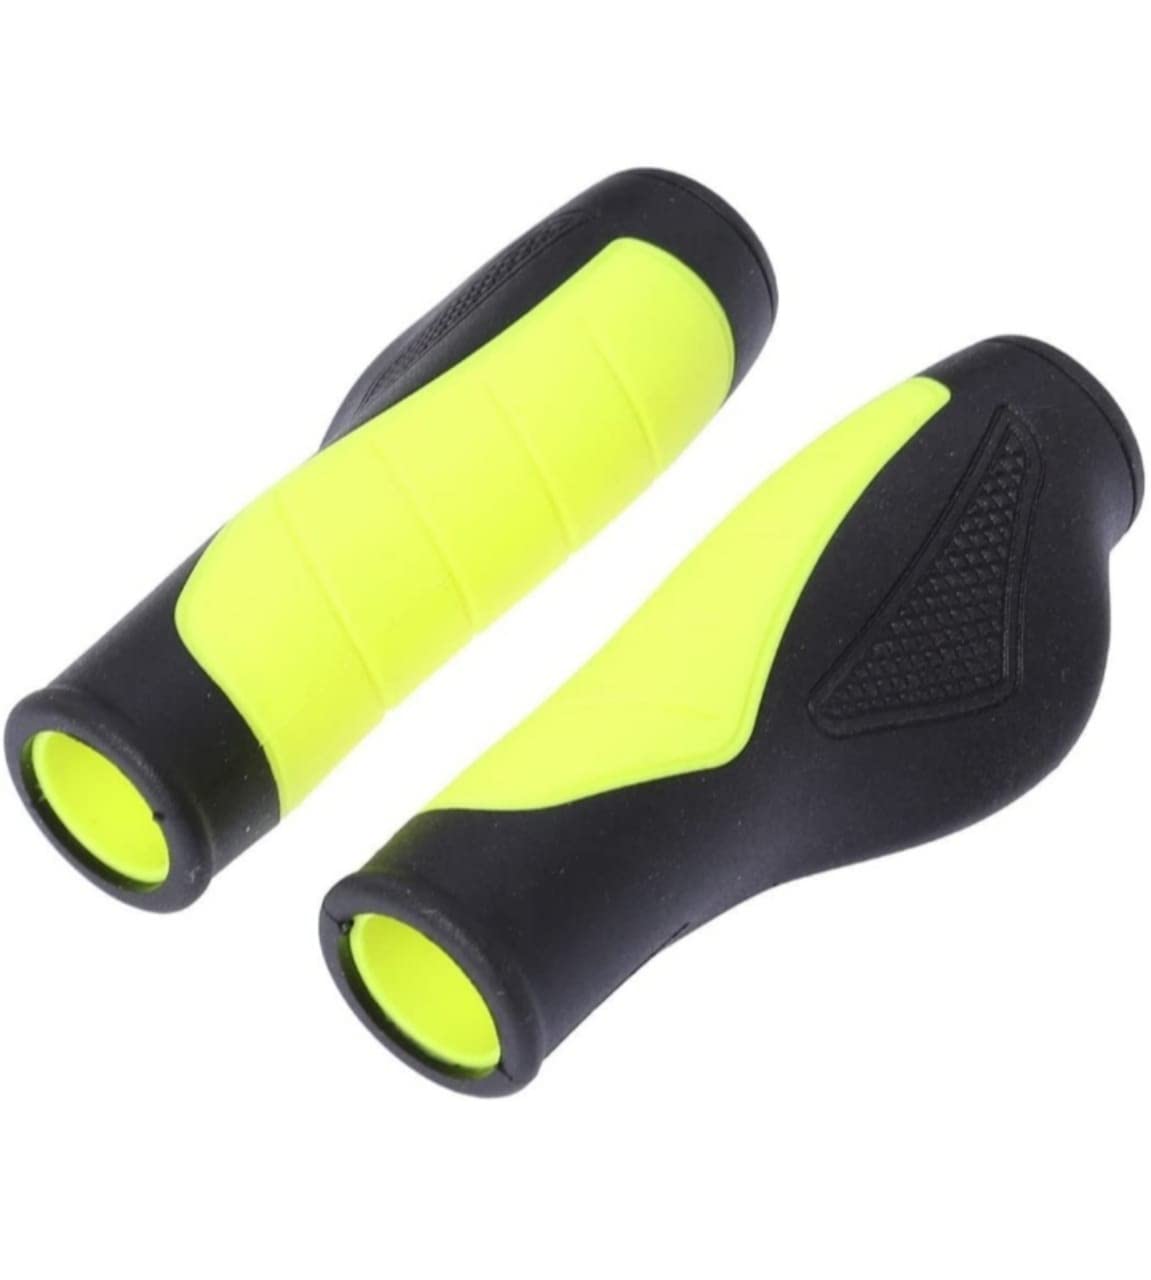 Bicycle Grips for Mountain bikes